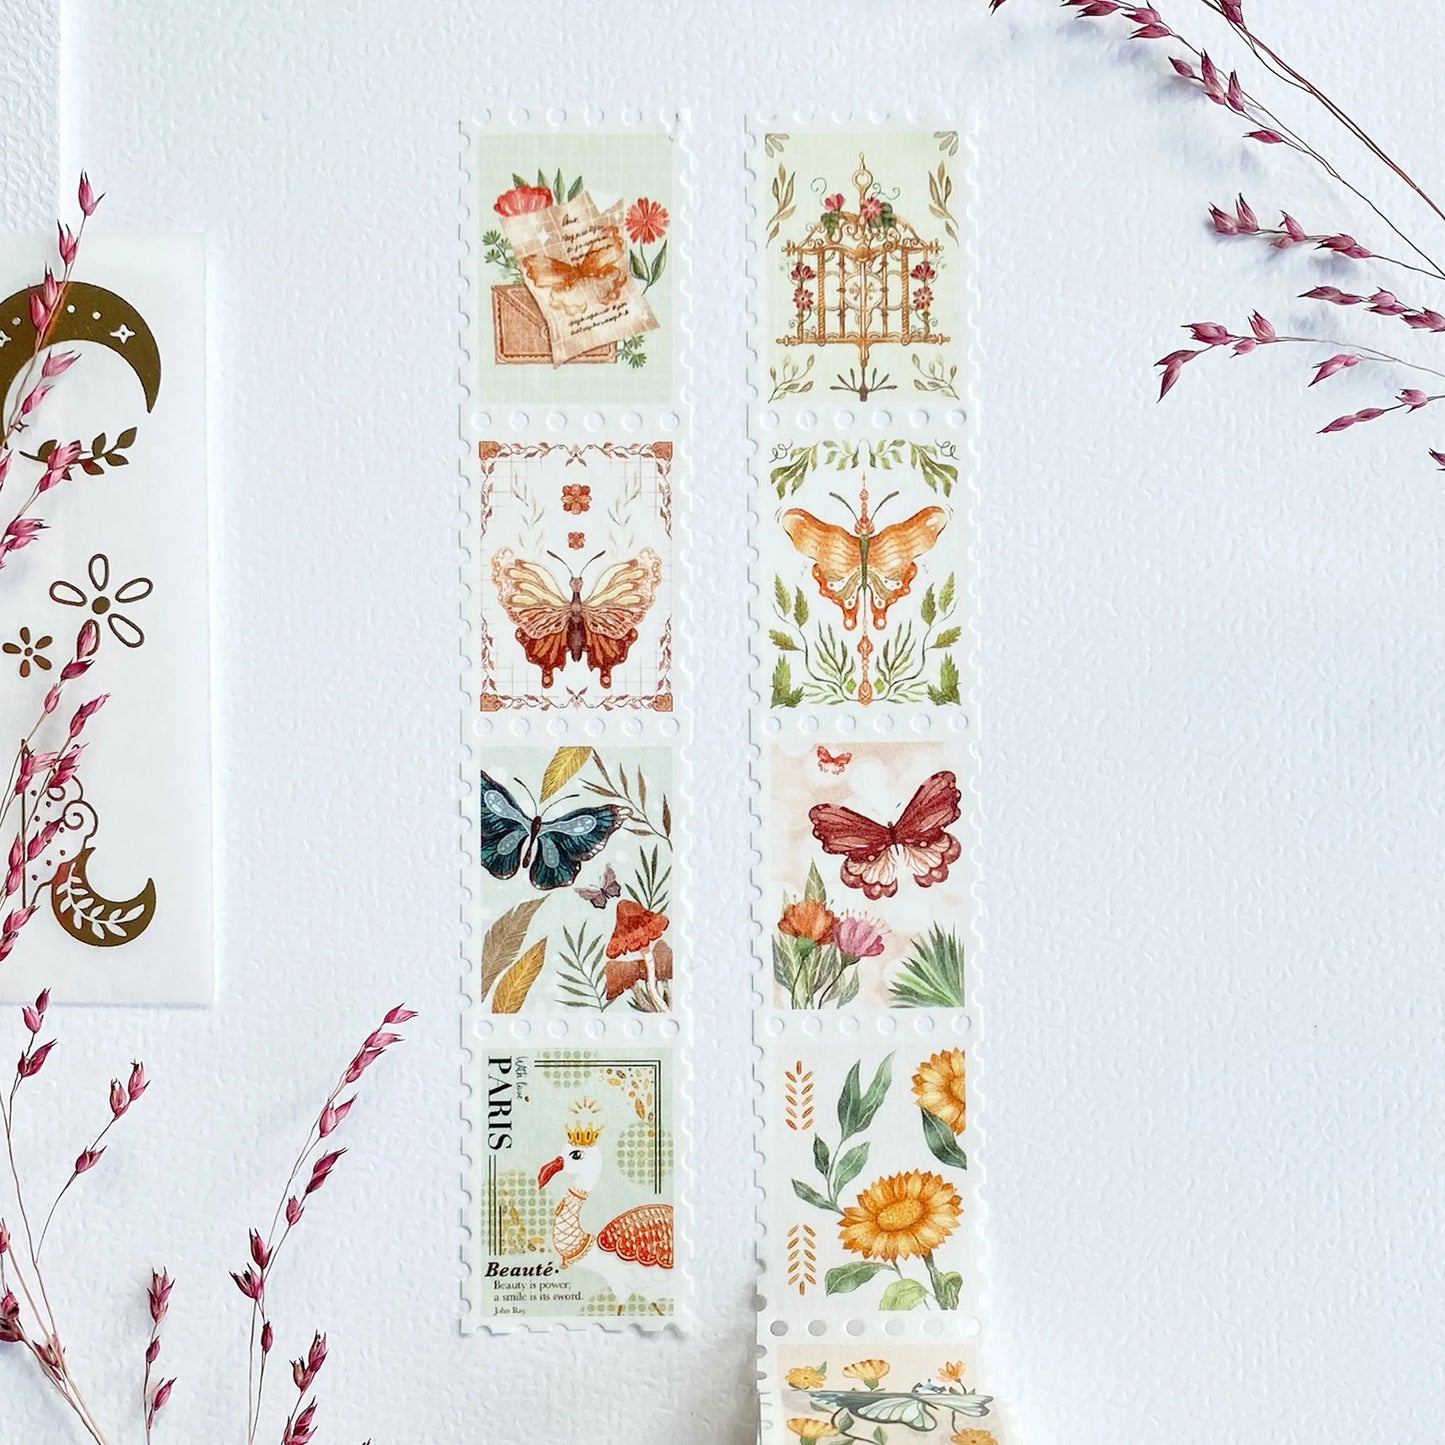 Washi tape Dreamy Stamps - LETTOOn